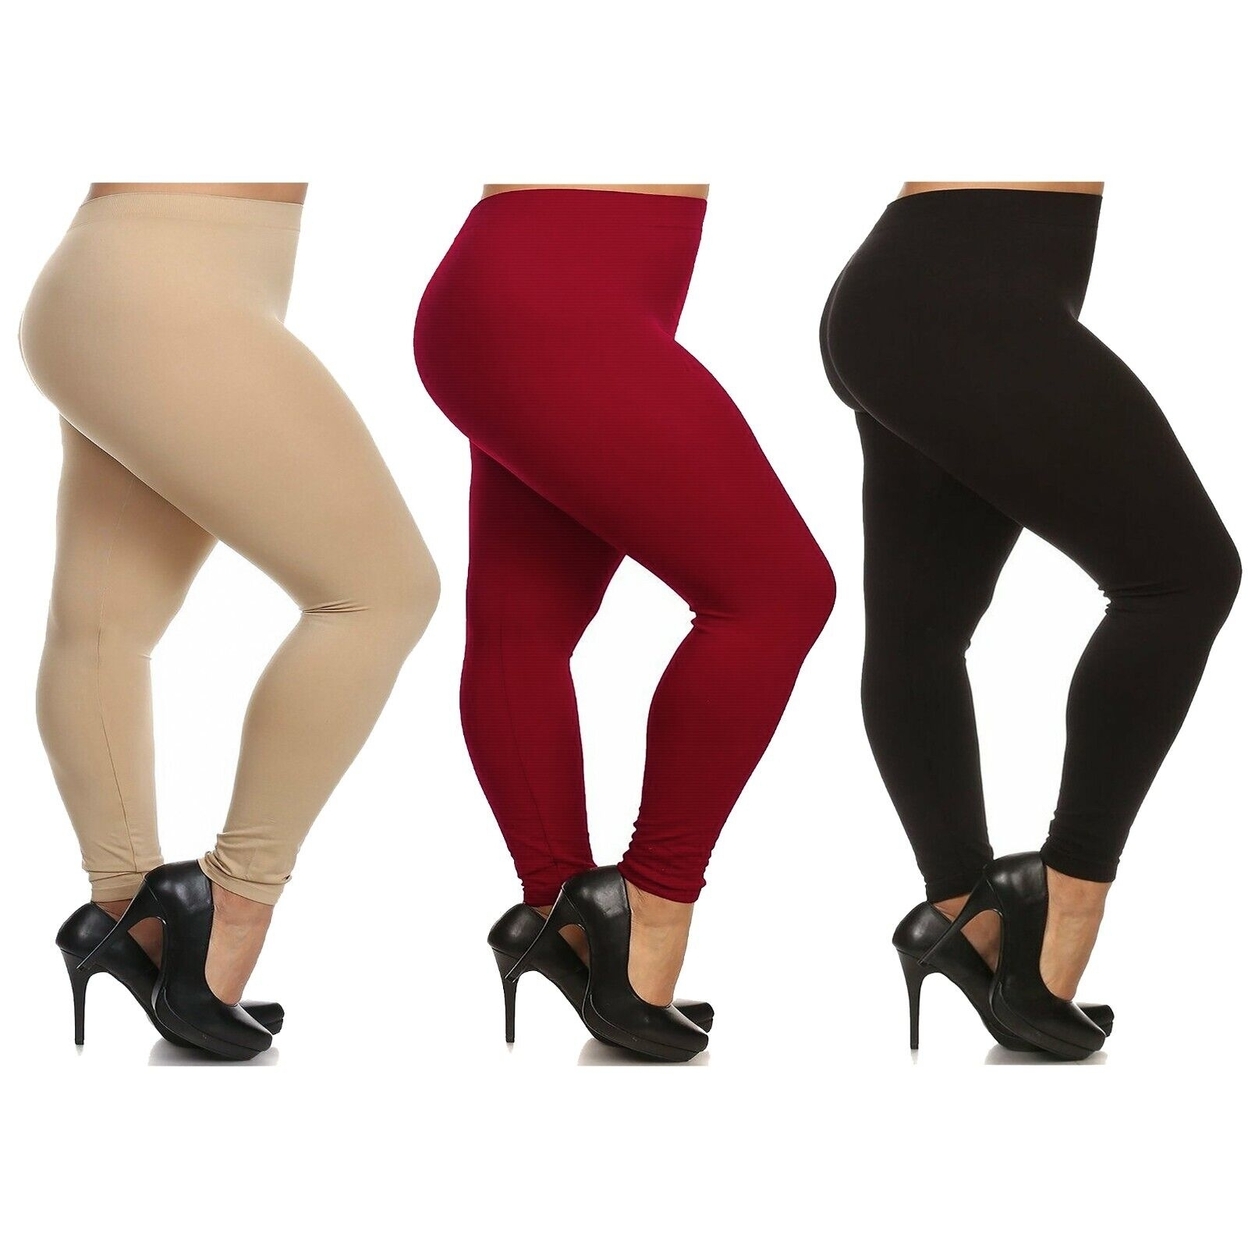 3-Pack: Women's Casual Ultra-Soft Smooth High Waisted Athletic Active Yoga Leggings Plus Size Available - Red,red,red, 3x